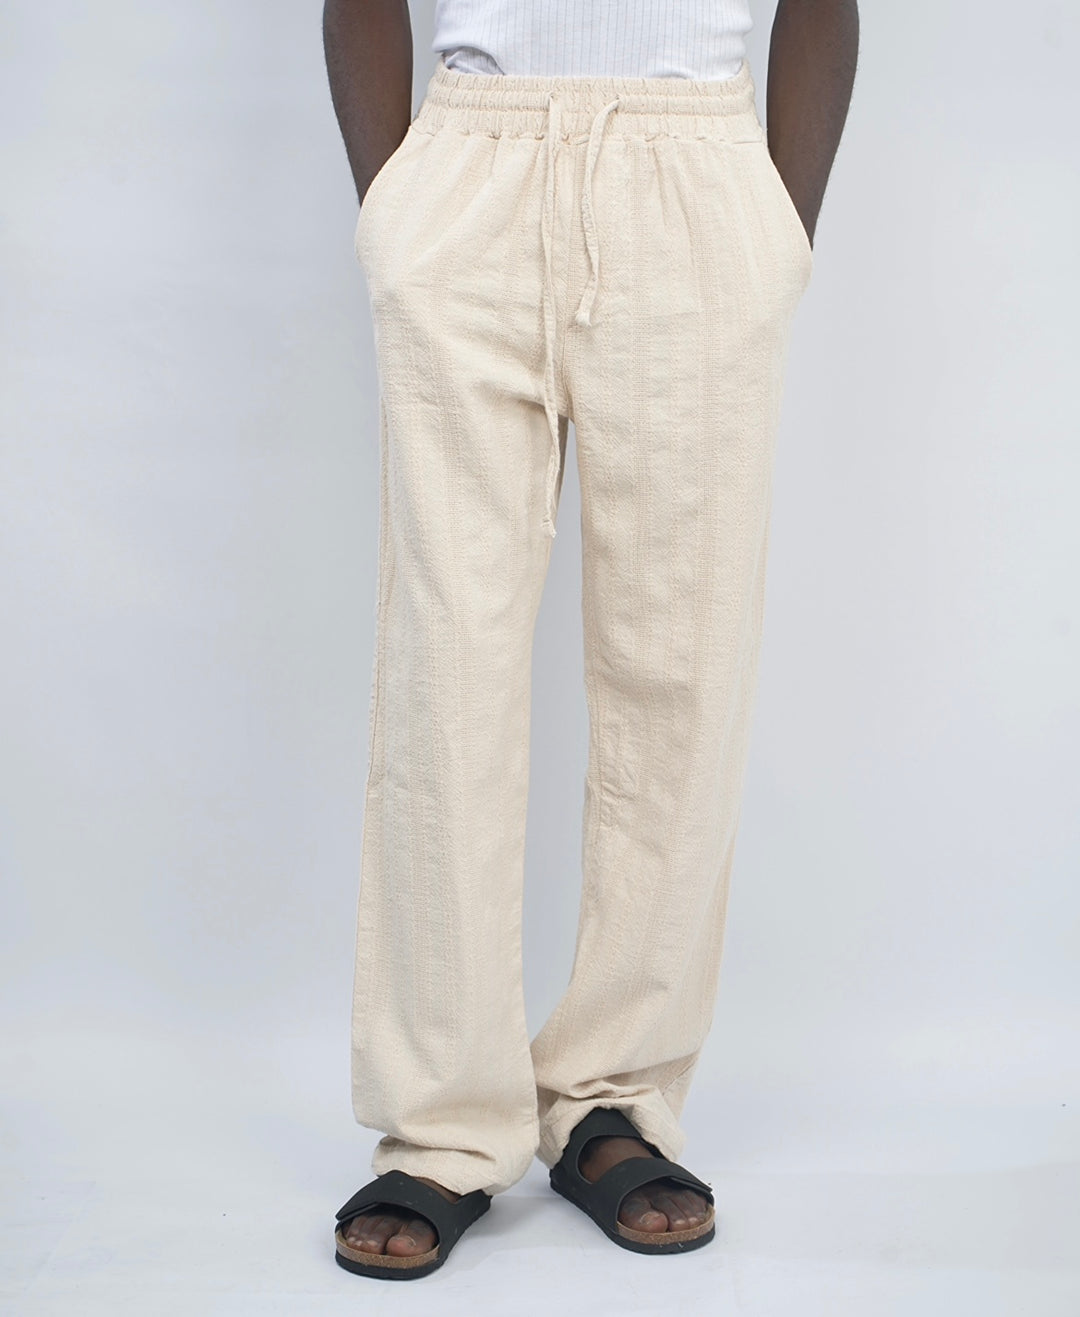 Giesto cable knit tall Linen pants in beige